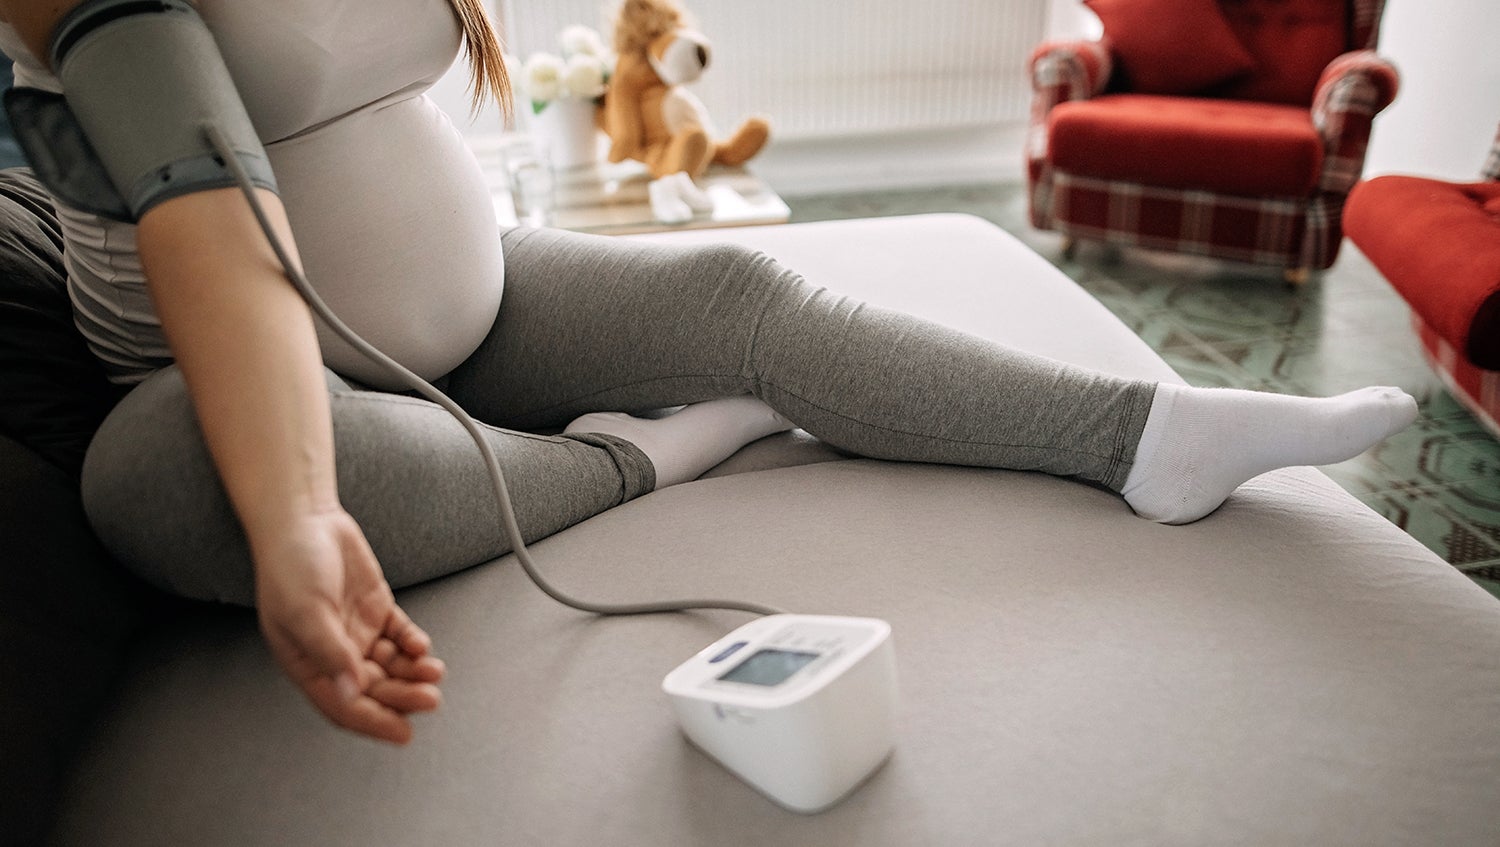 pregnant woman monitoring blood pressure remote at home